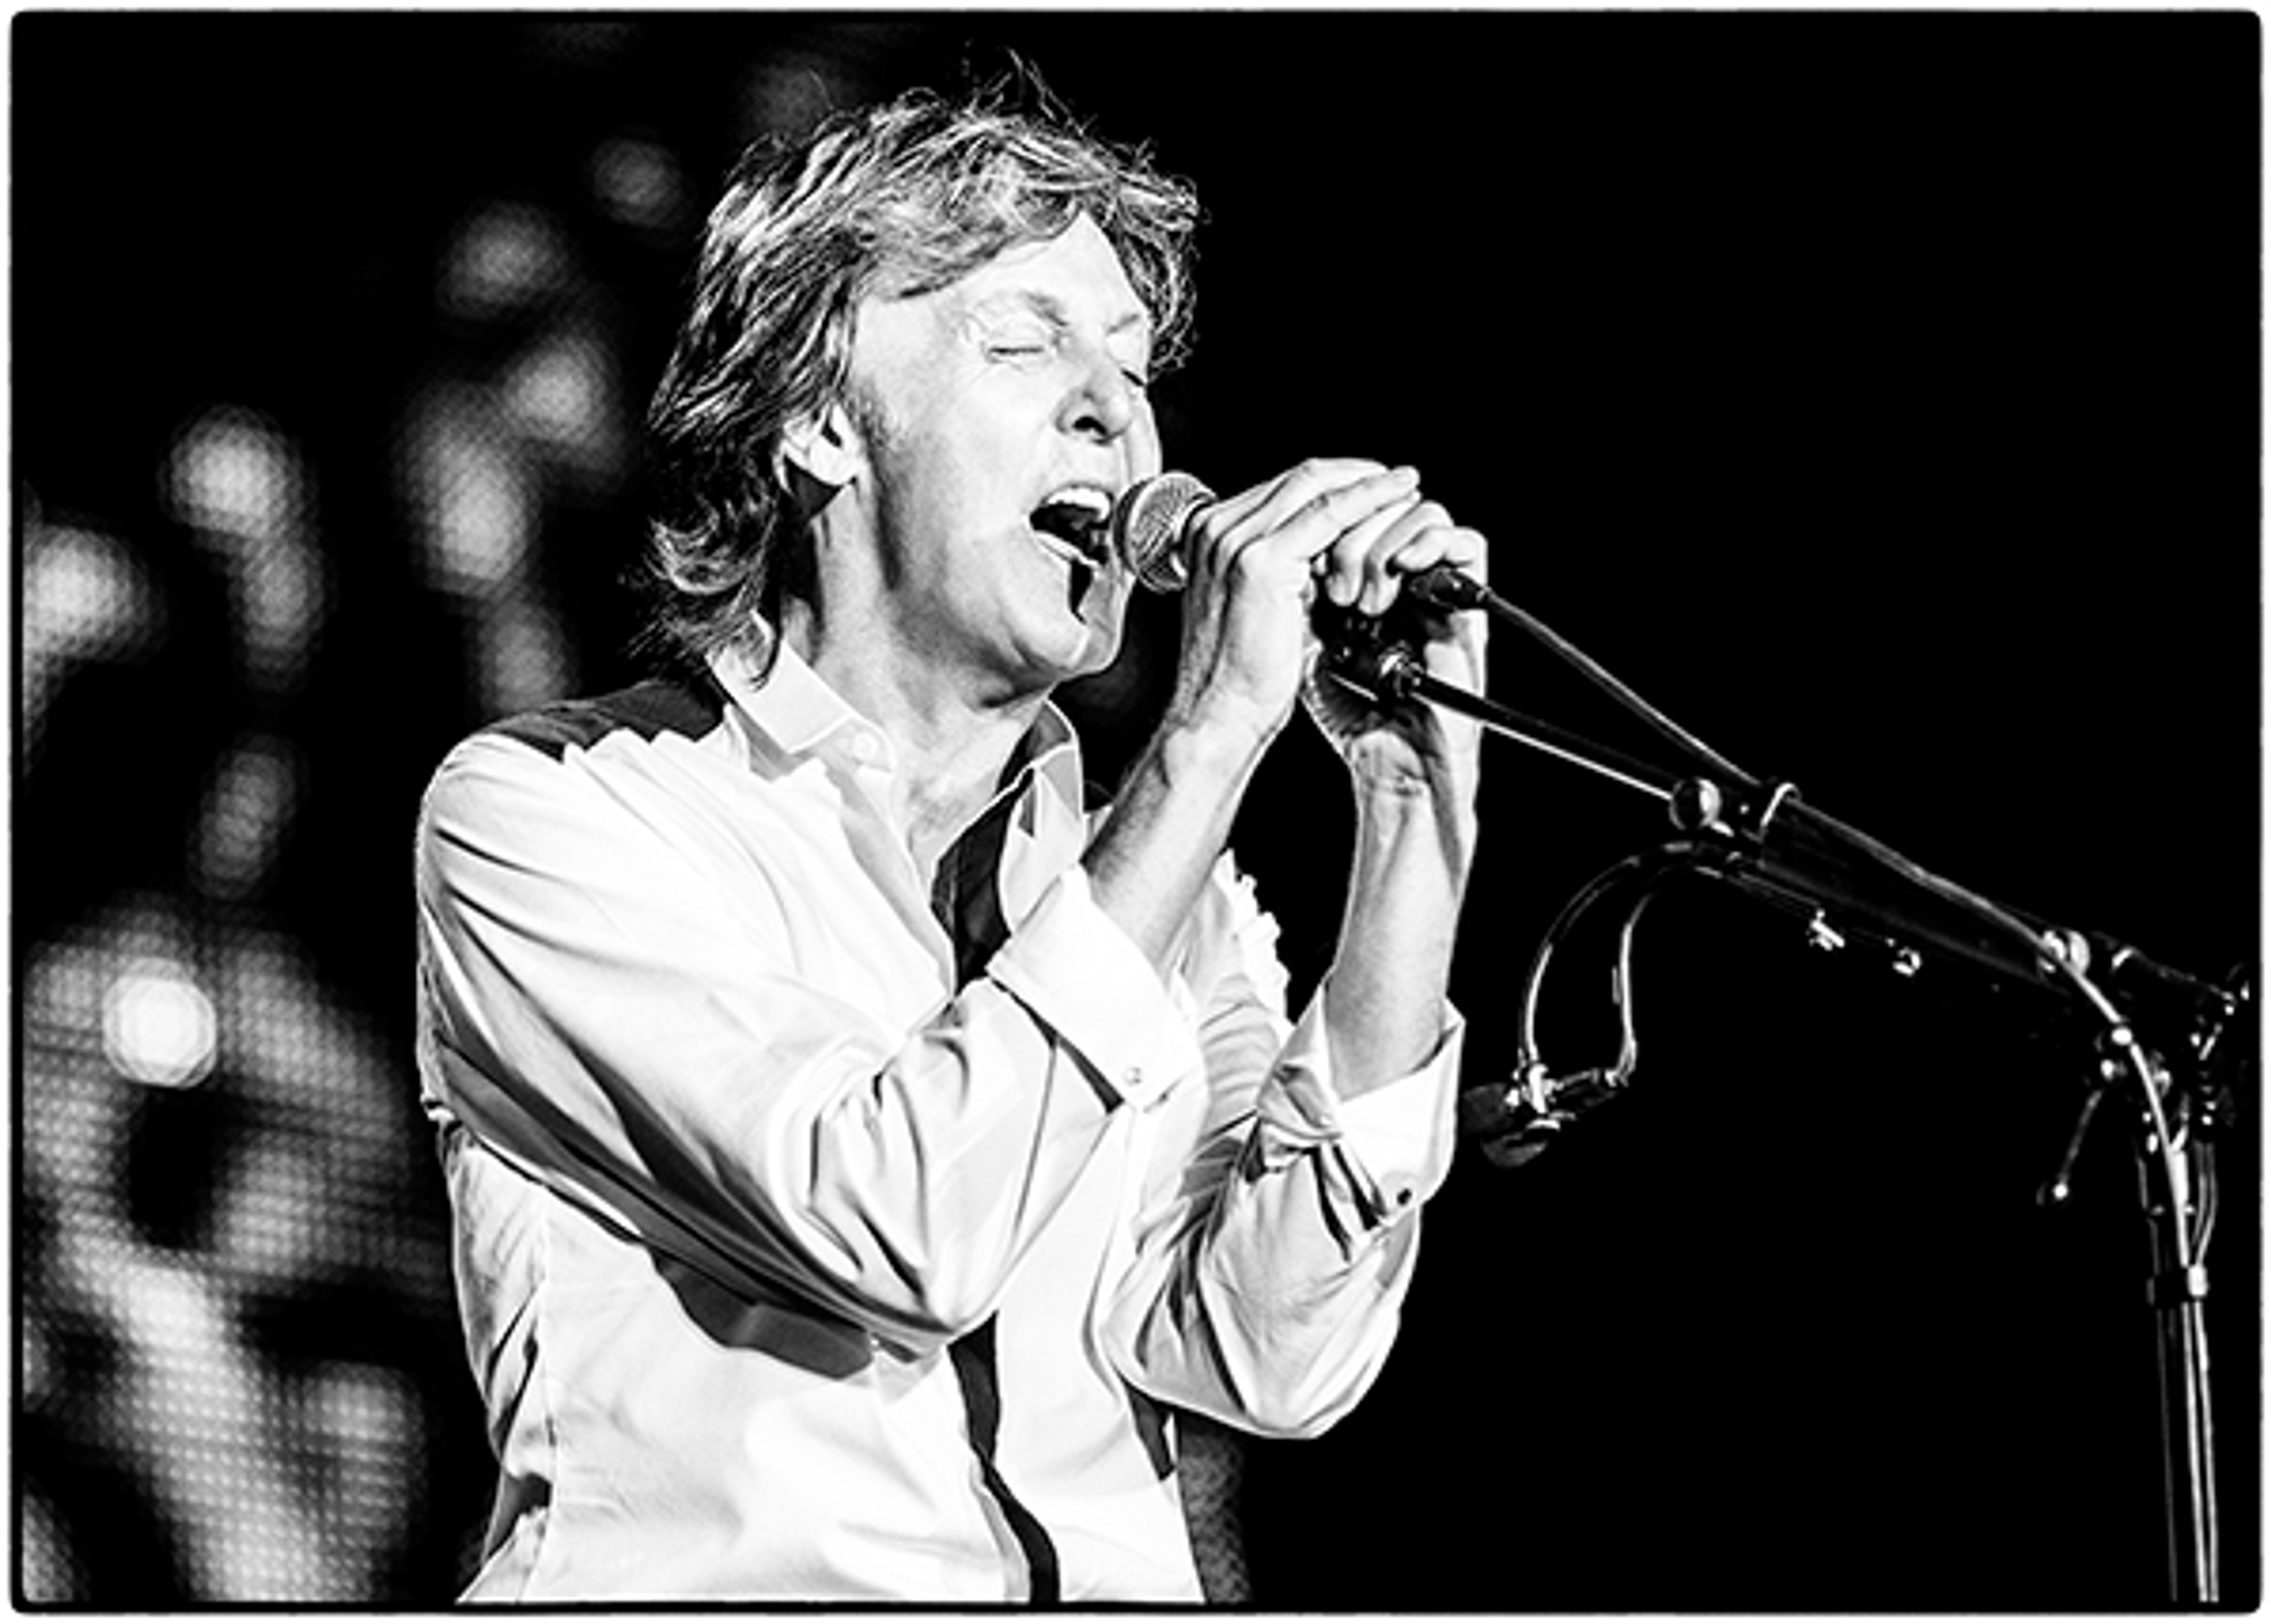 Shure Partners With Paul McCartney And The Who To Auction Limited Edition Graphic Painted Microphones